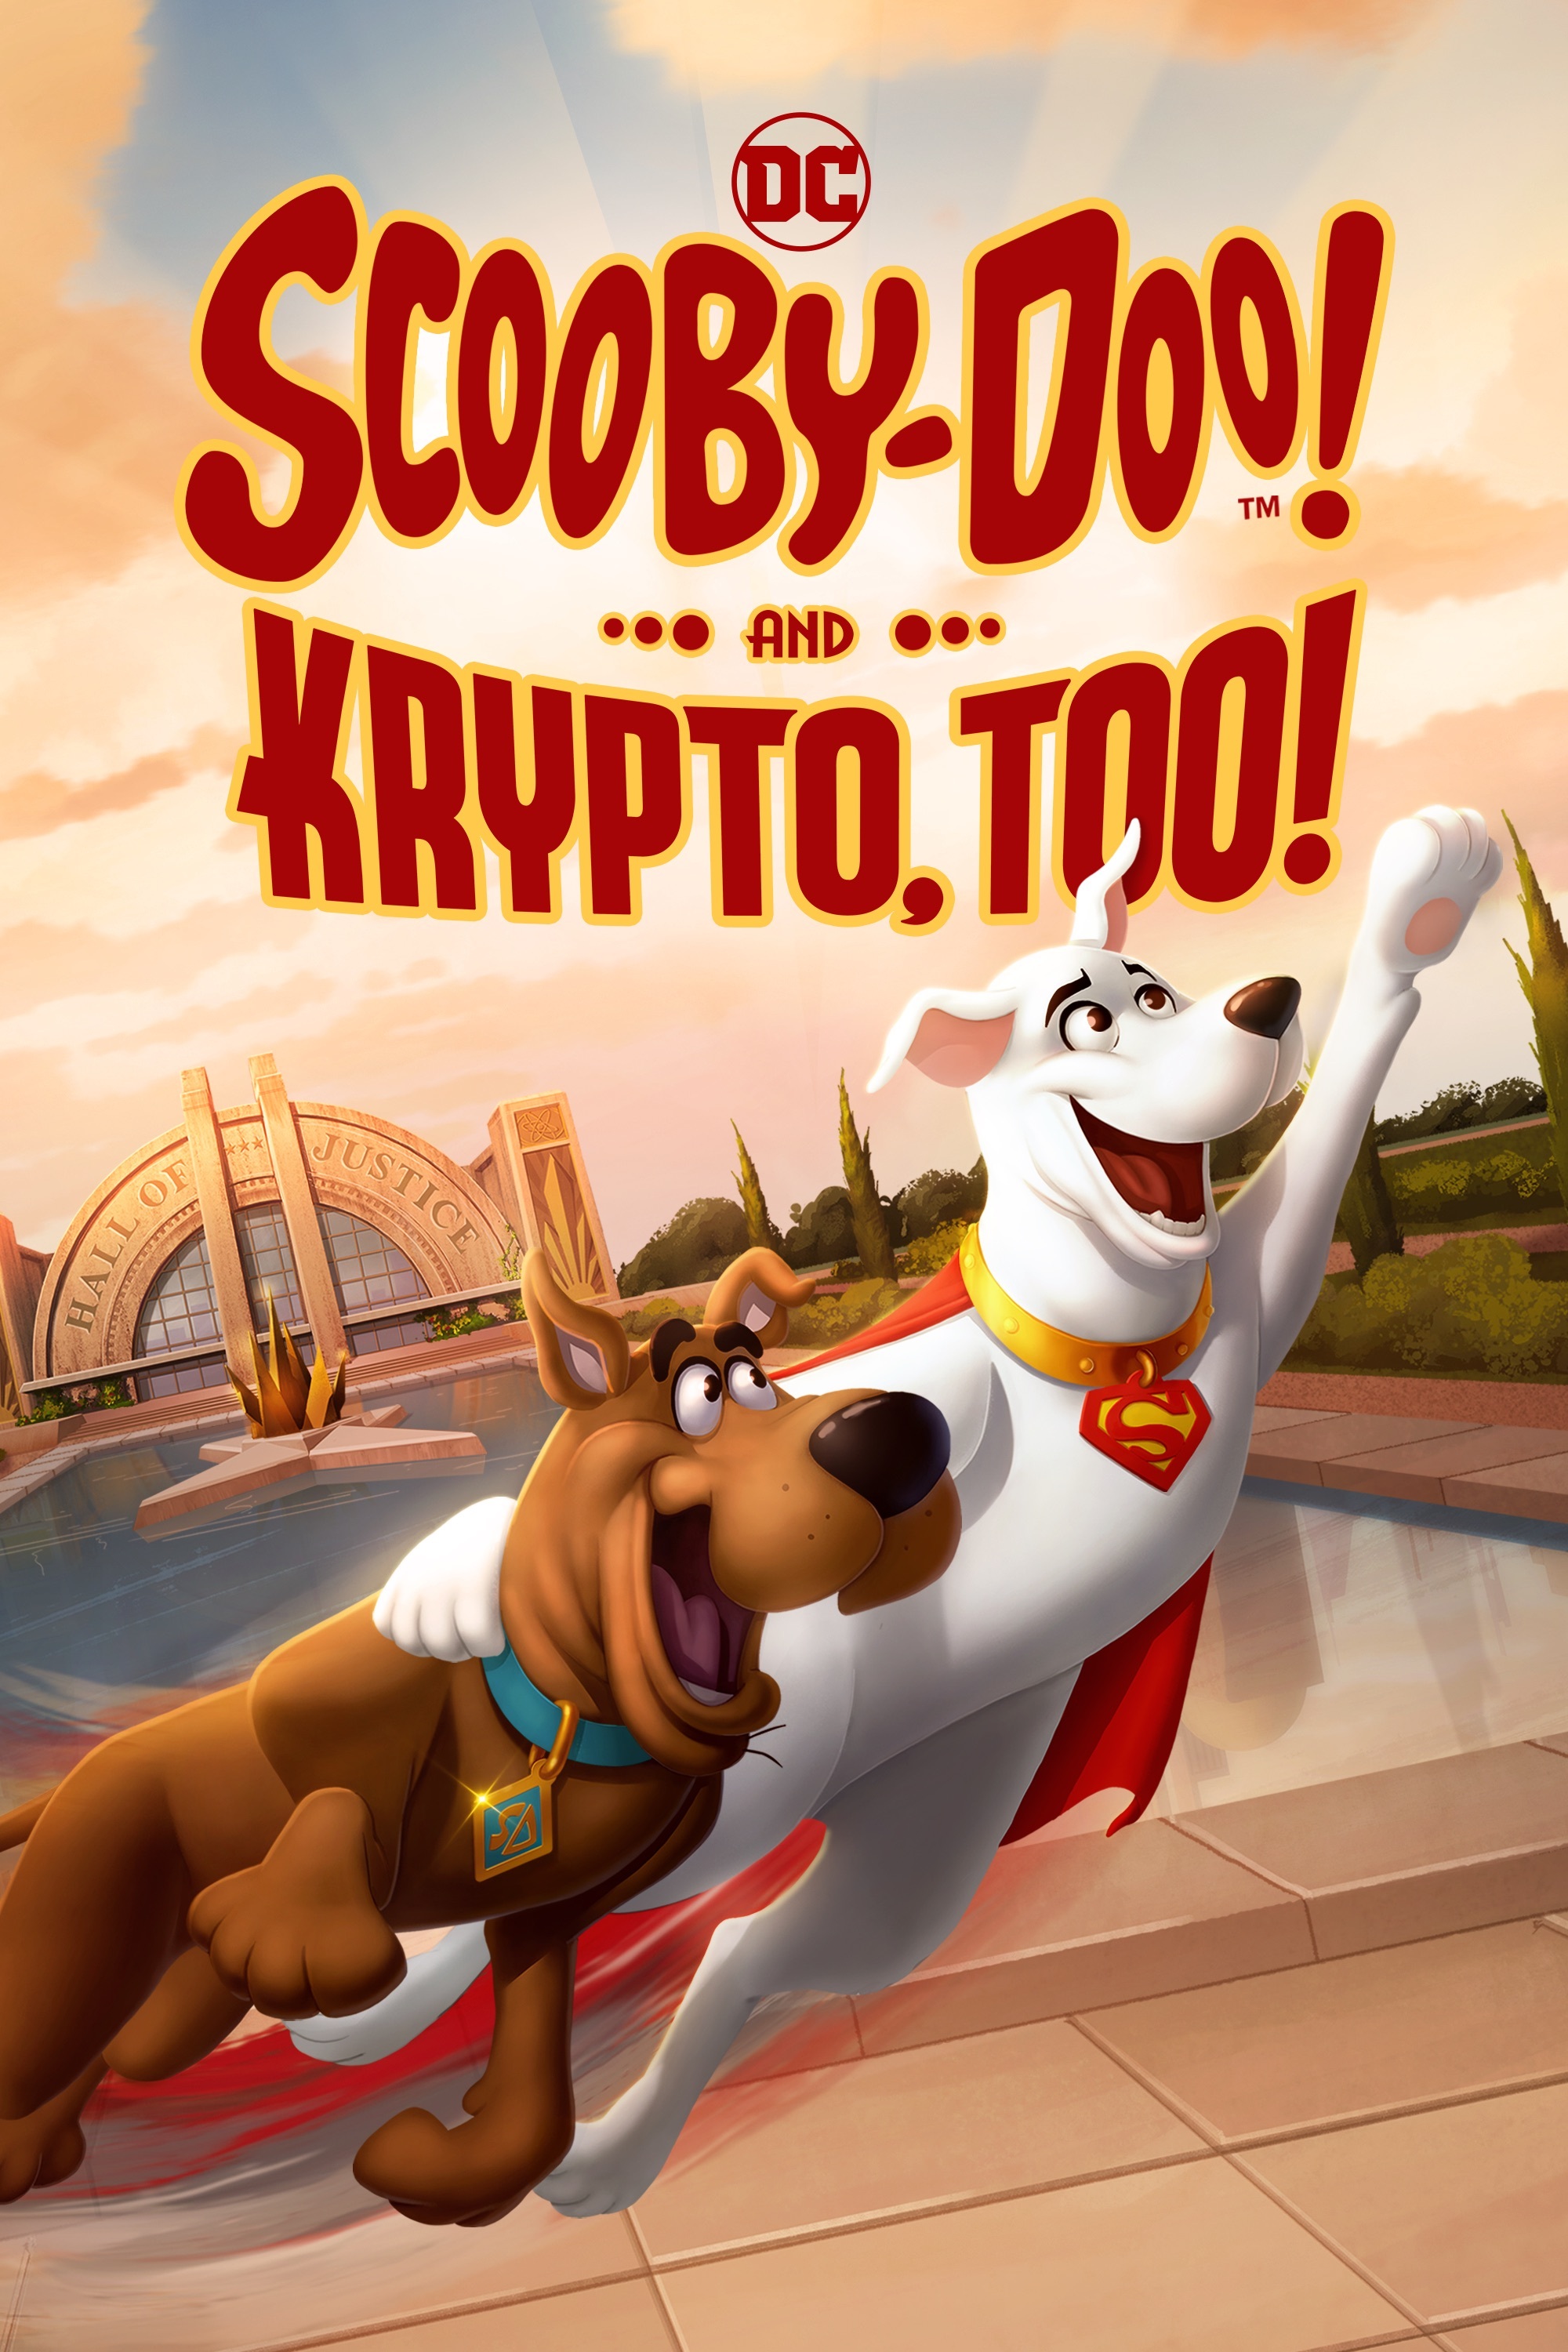 scooby doo! and krypto, too! movie poster